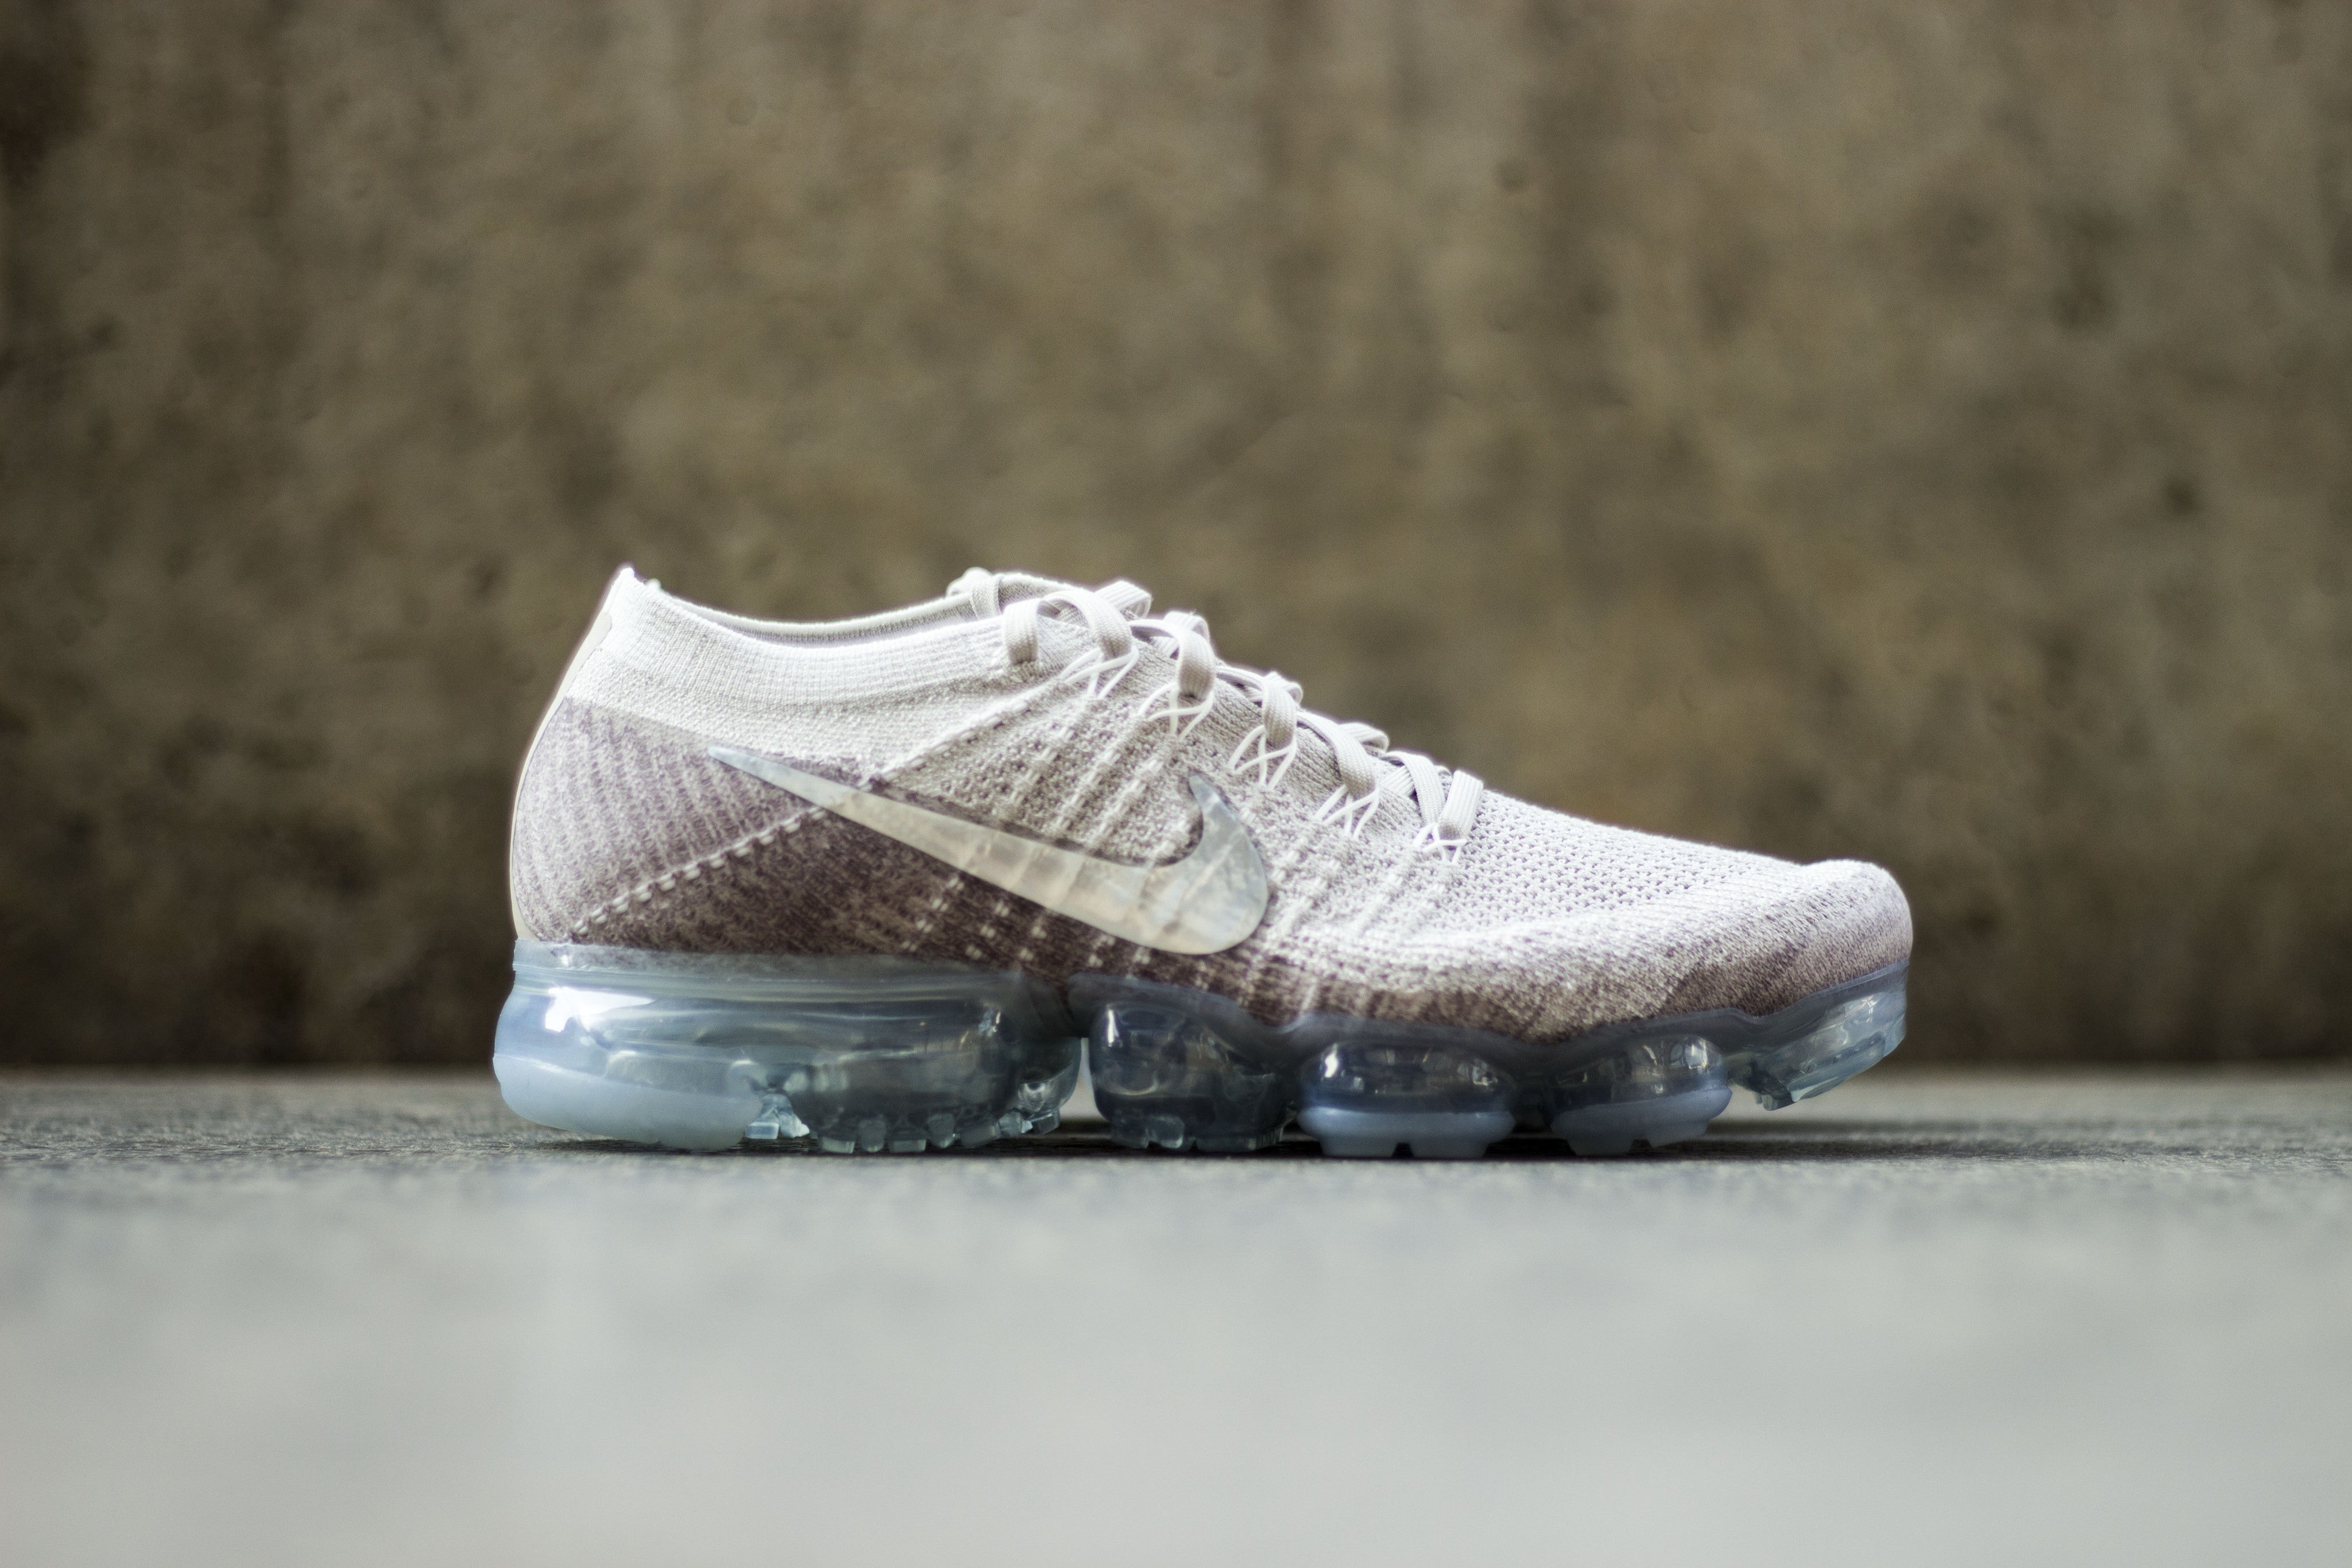 vapormax nike price in south africa 